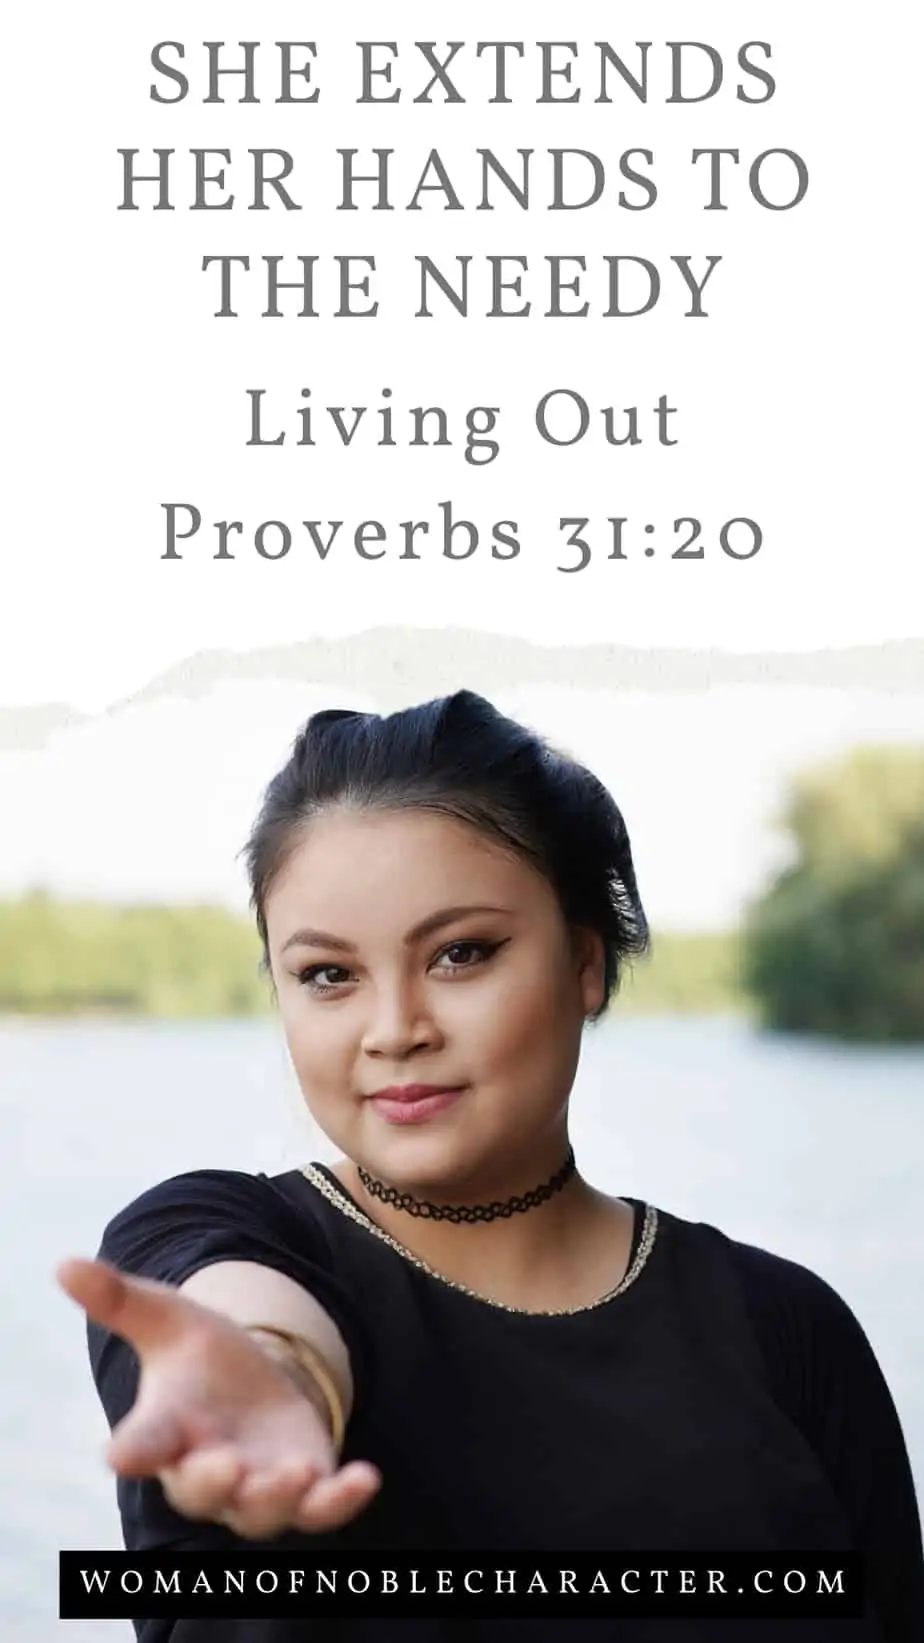 image of woman reaching her hand out with text Proverbs 31:20. She opens her arms to the poor & extends her hands to the needy. A deeper look at this verse and how to live it out in your life as a Christian.